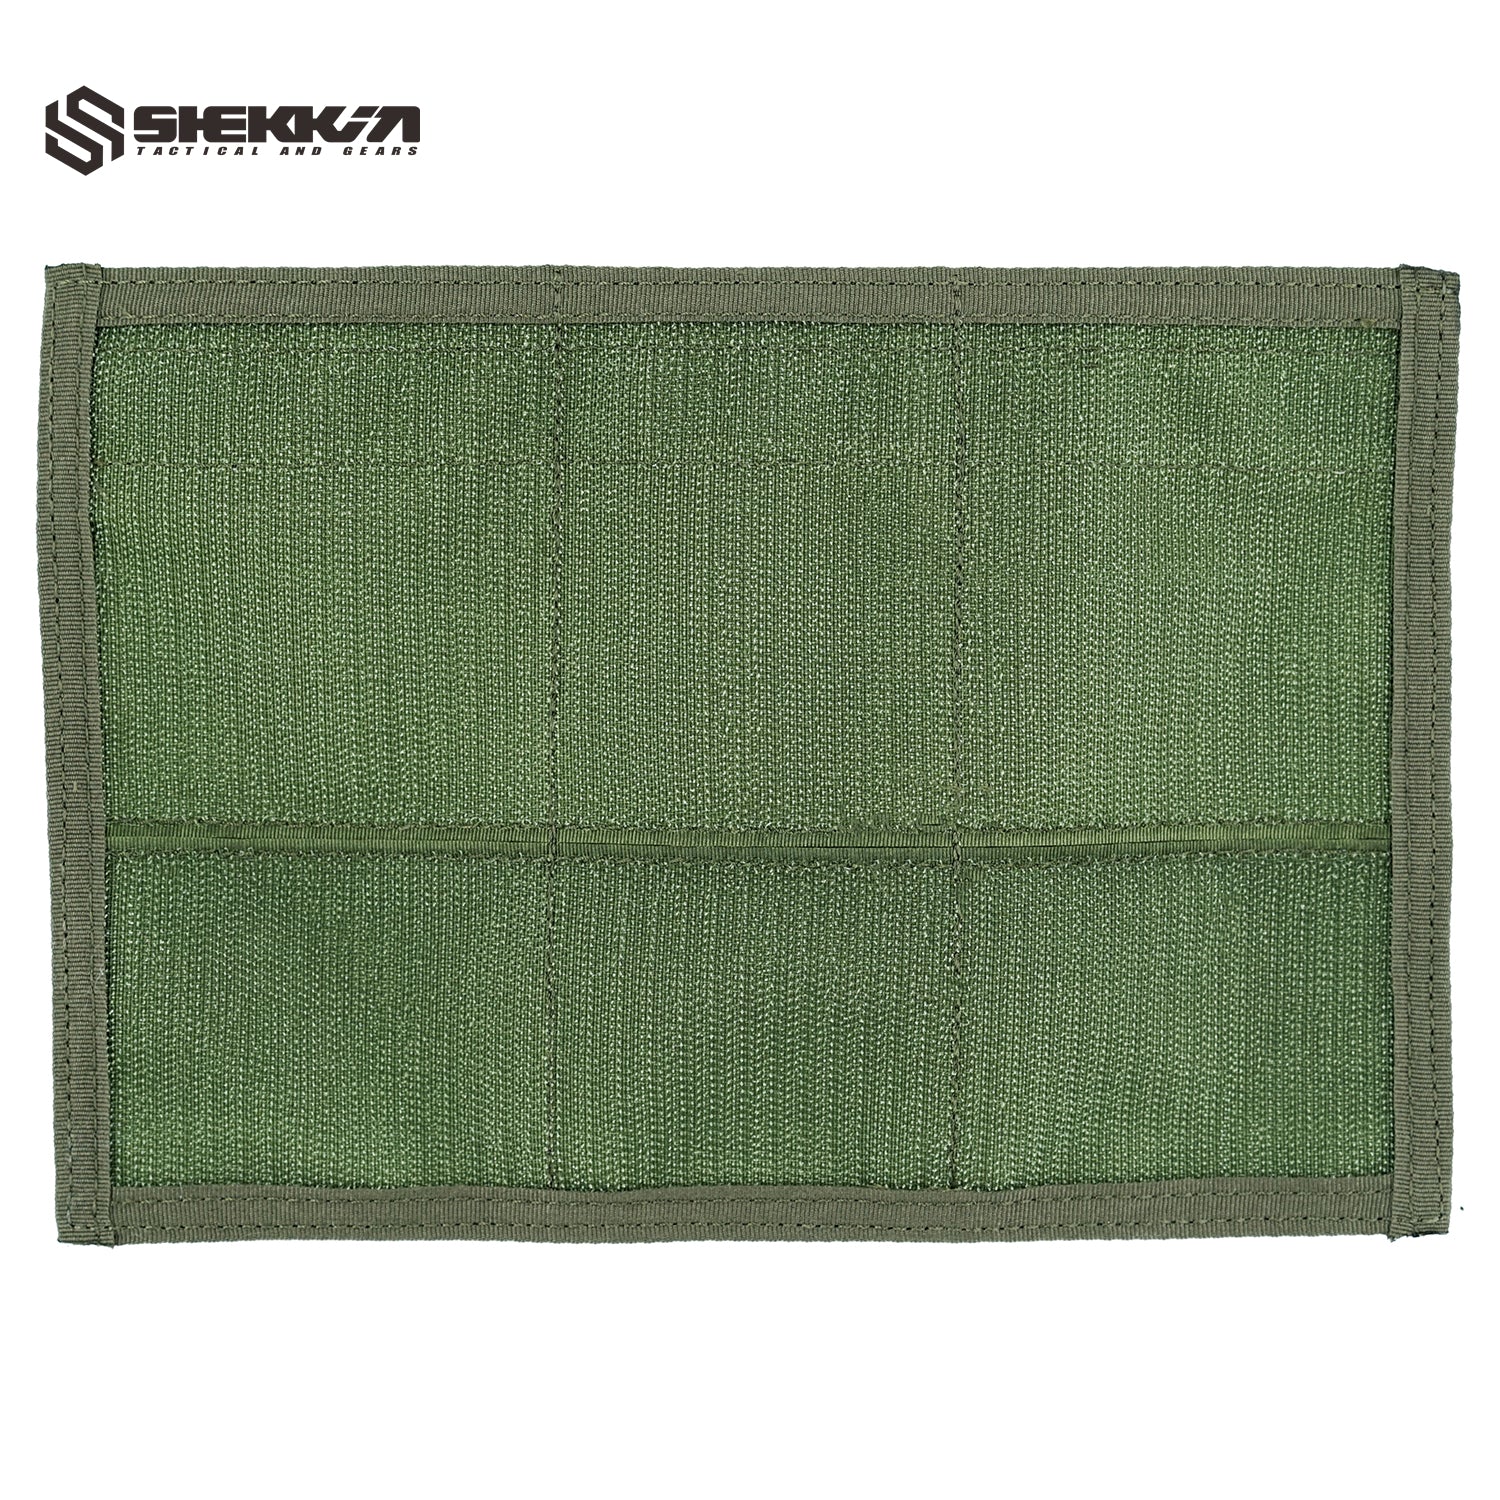 Pre MSA Paraclete style Smoke green triple M4 mag pouch with velcro back - Shekkin Gears